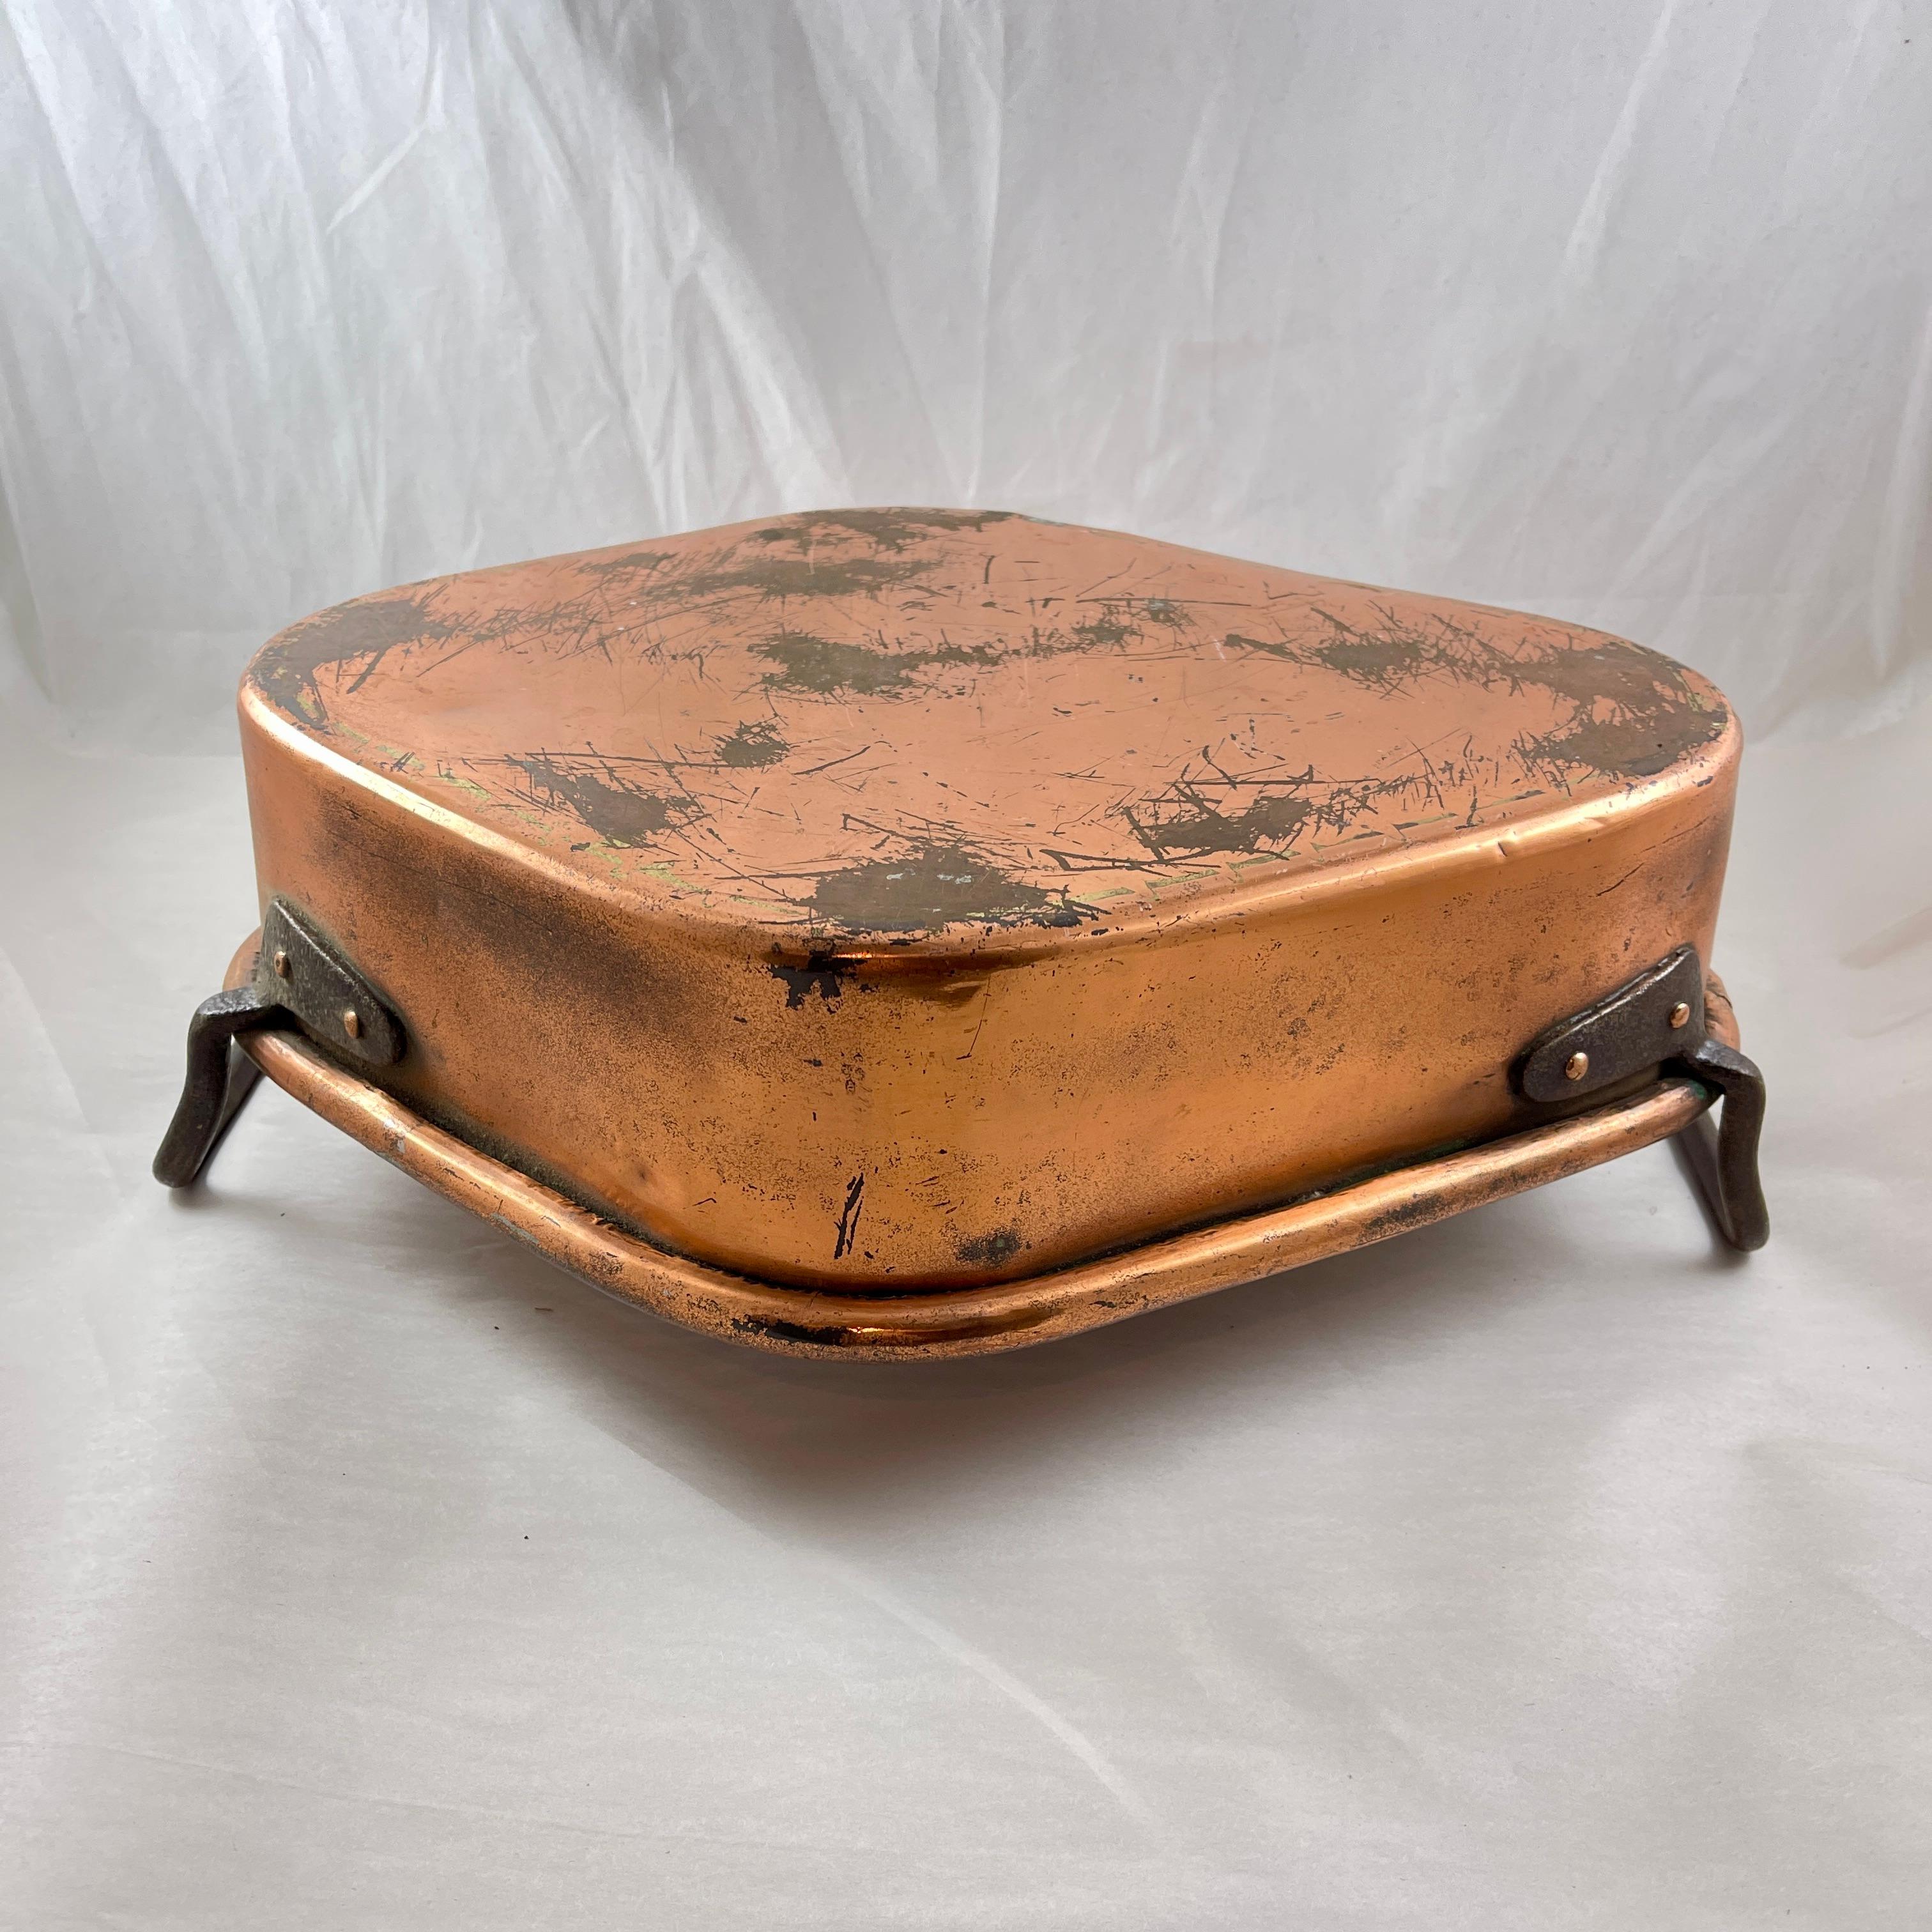 Rustic Country French Copper & Iron Handled Turbotiere Fish Poacher, c. 1850 For Sale 6